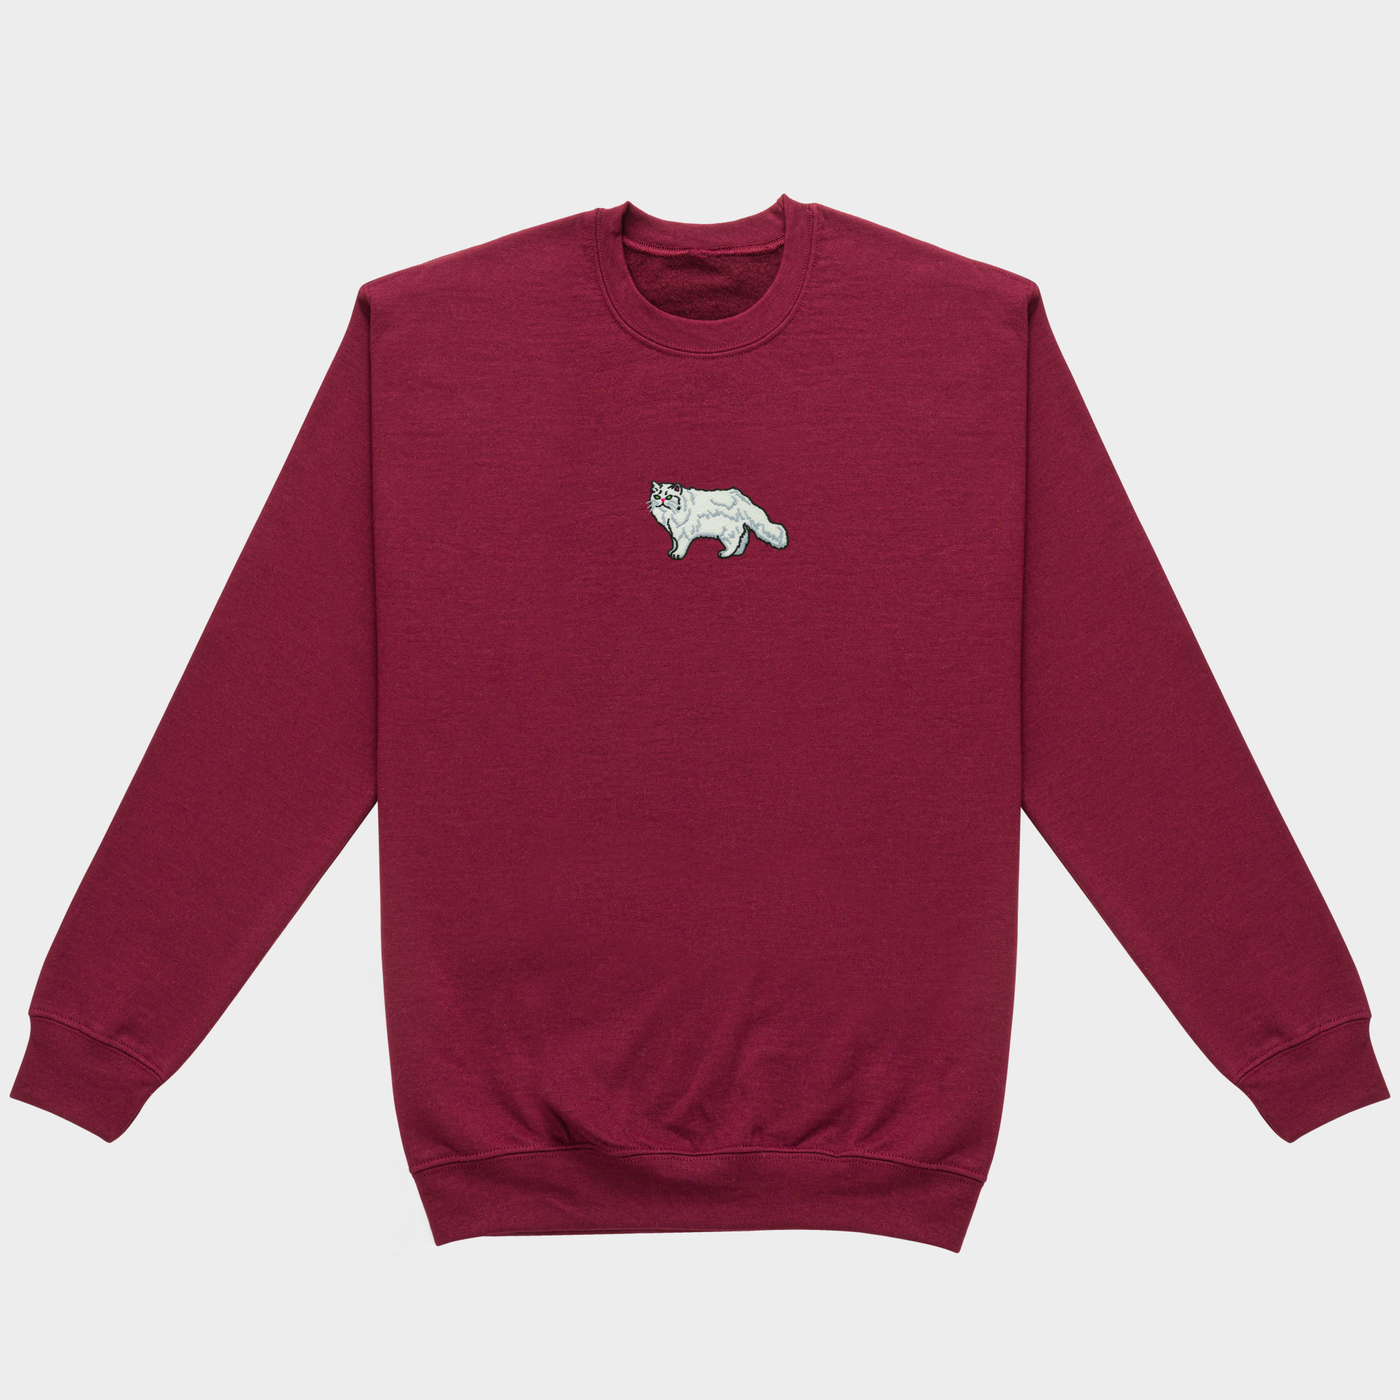 Bobby's Planet Men's Embroidered Persian Sweatshirt from Paws Dog Cat Animals Collection in Maroon Color#color_maroon